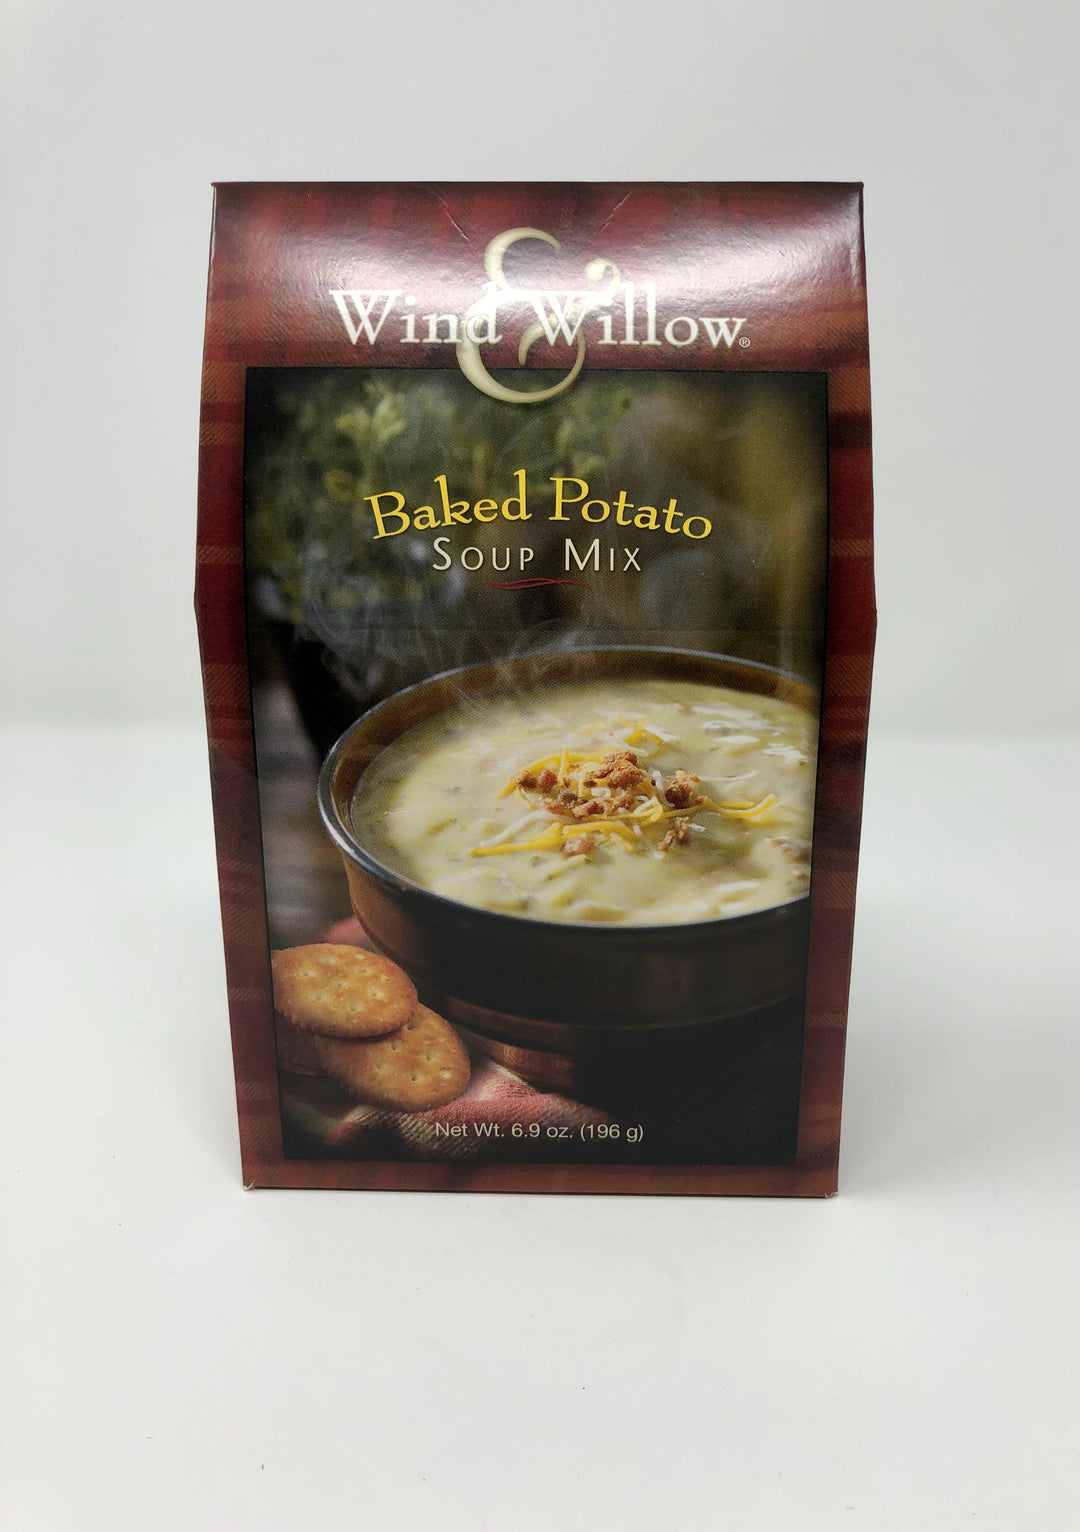 Wind & Willow Baked Potato Soup Mix